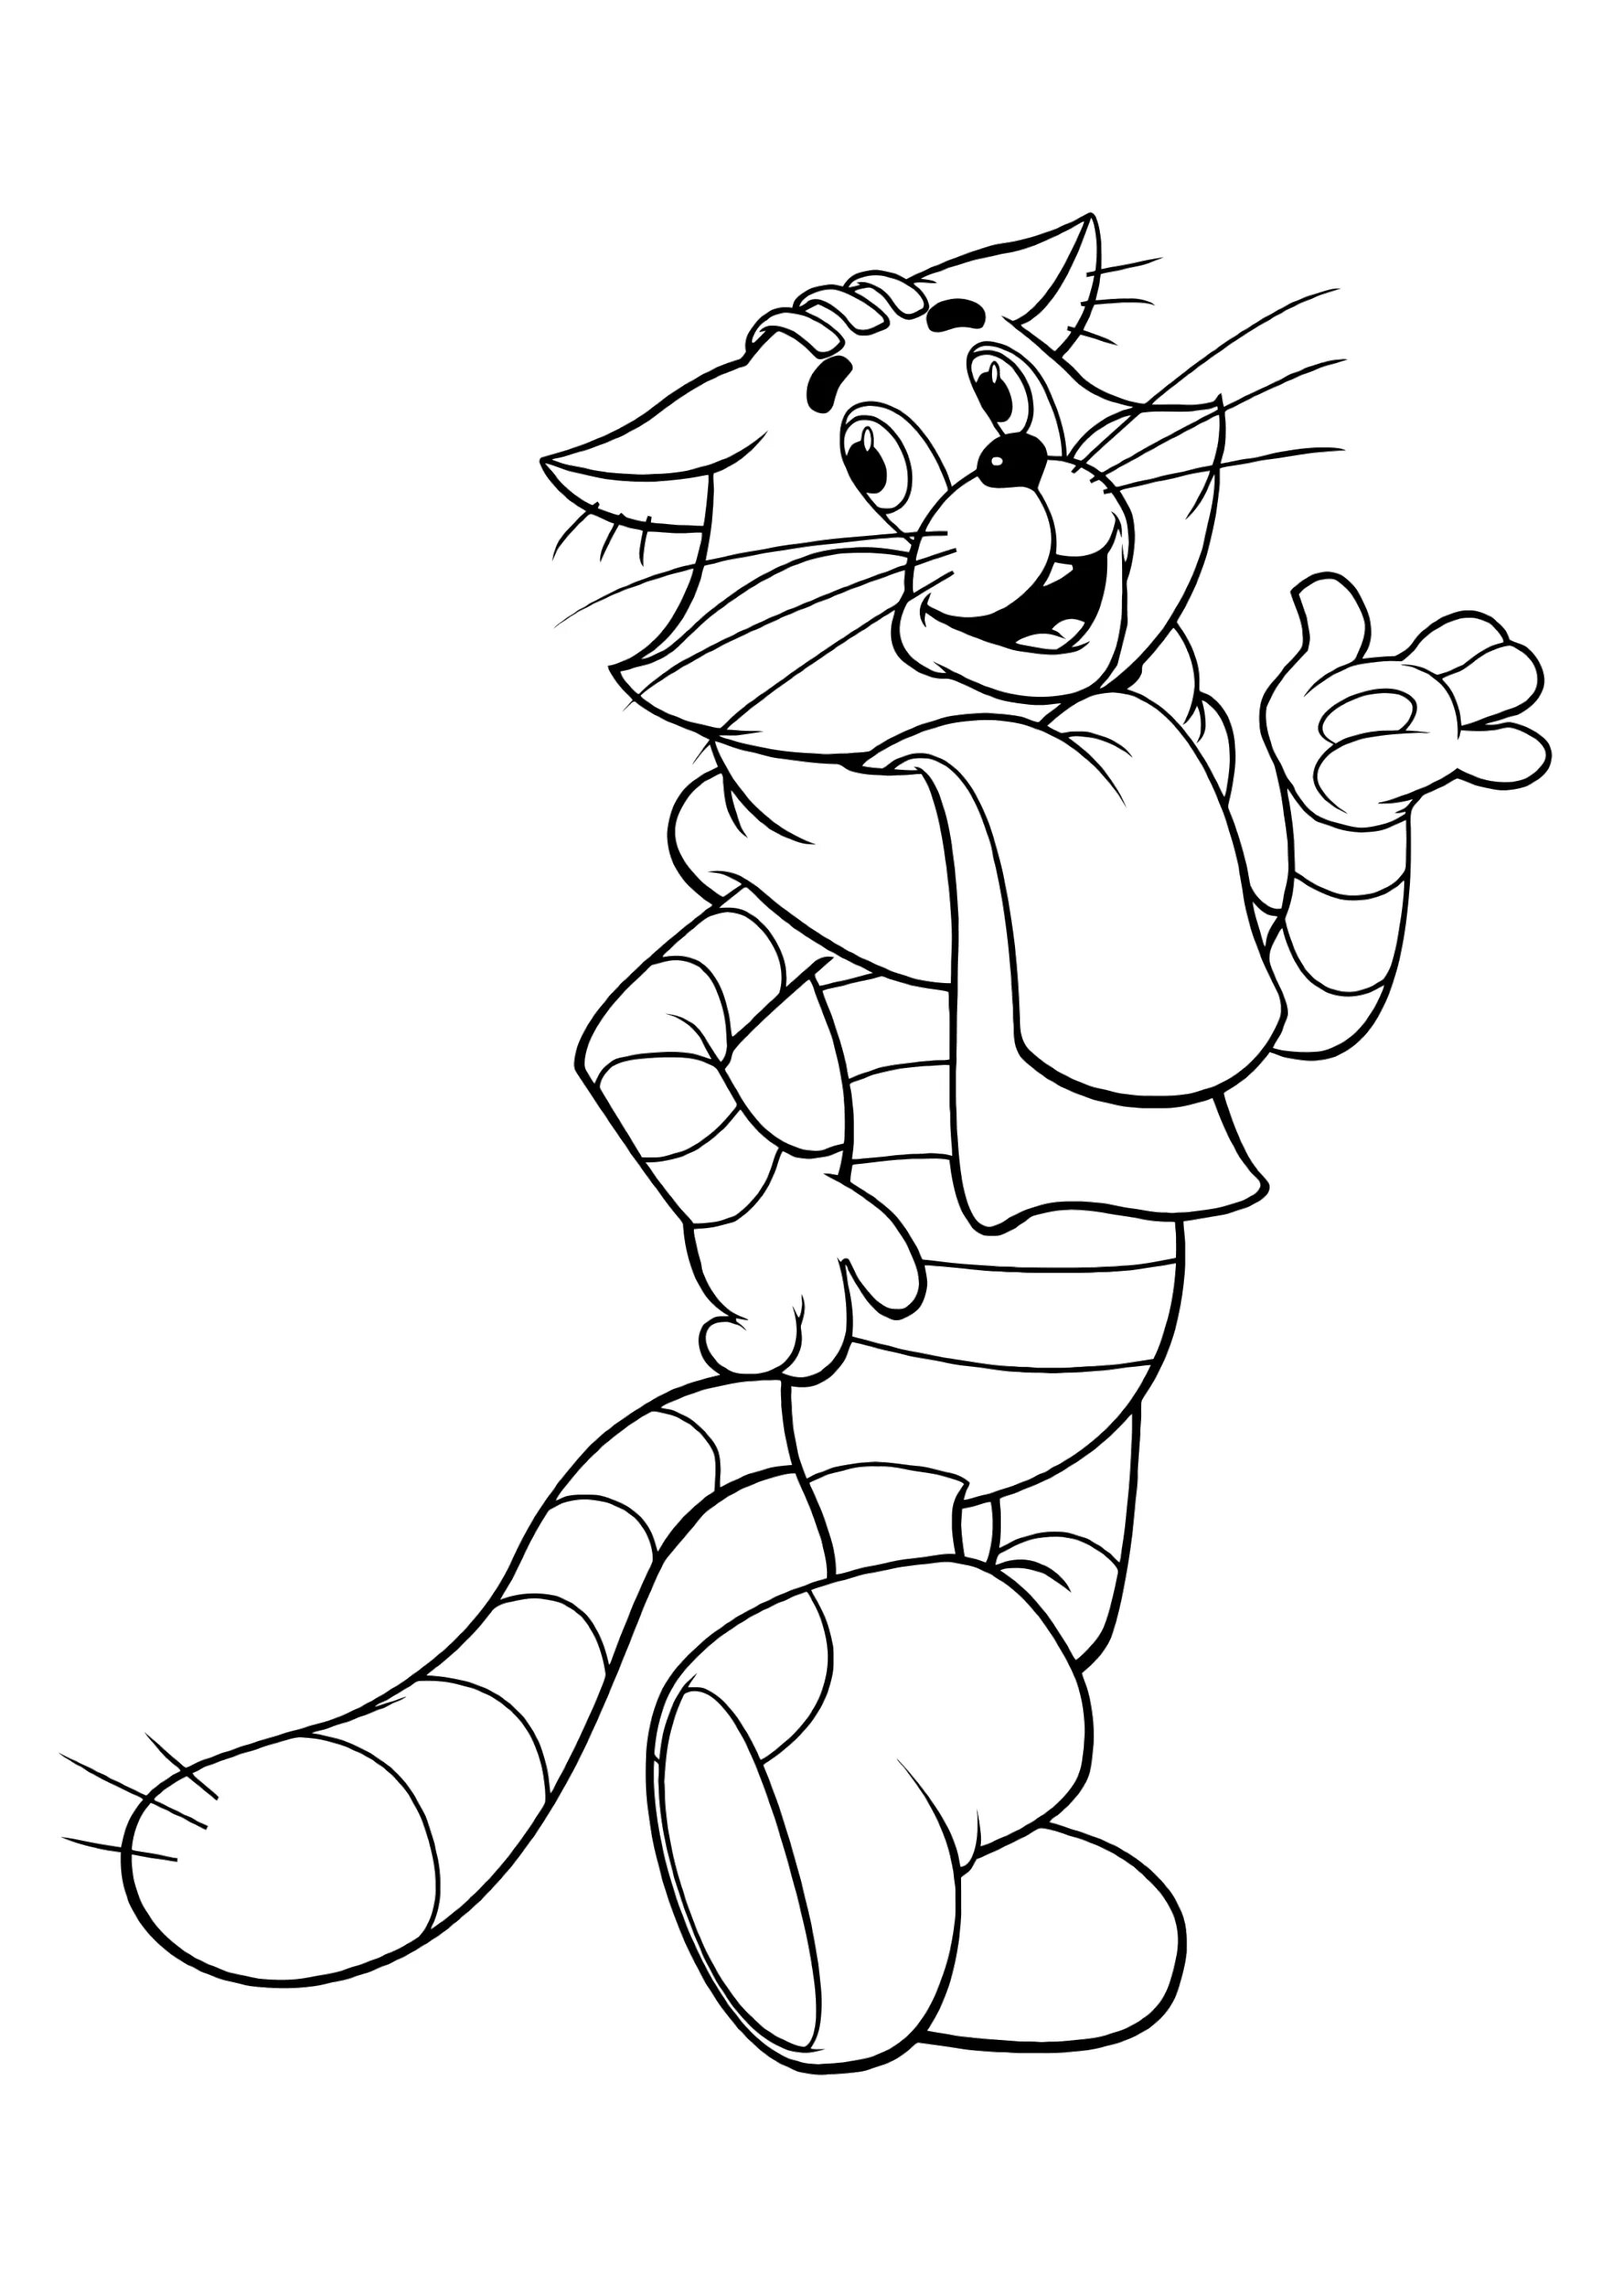 Playtime sailor skin coloring page for toddlers